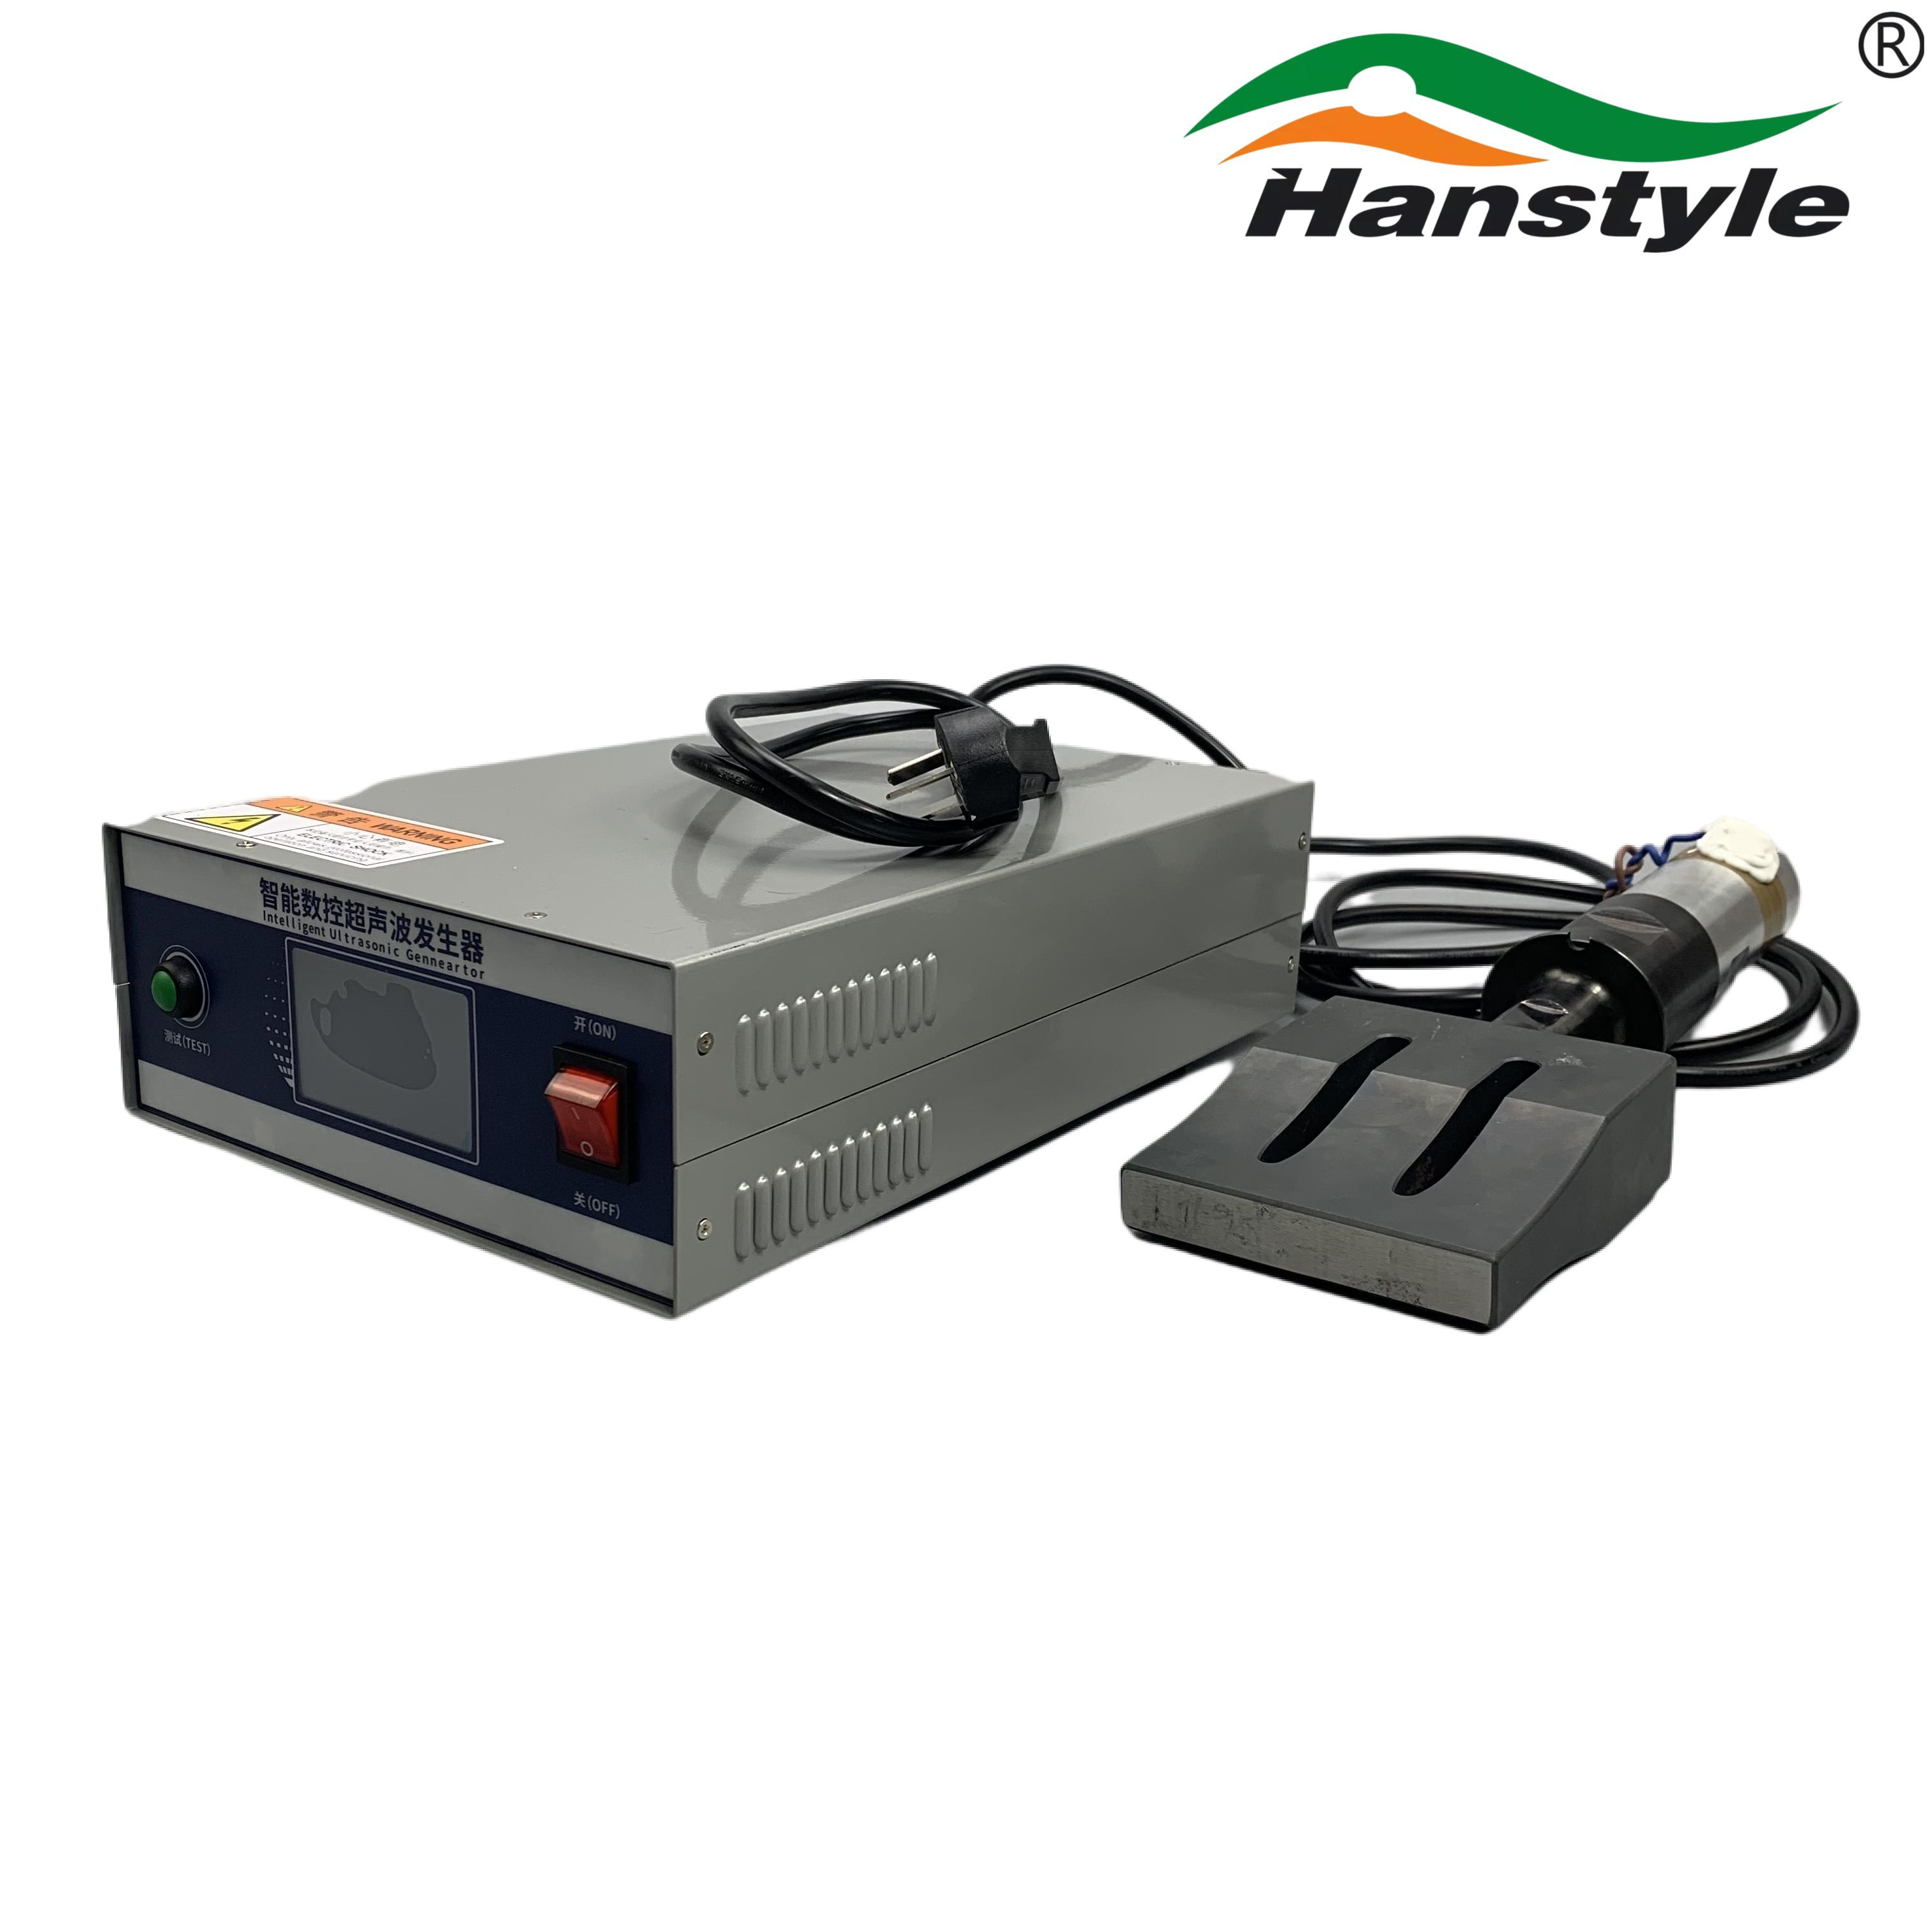 Advantages of Ultrasonic Welding Technology by Hanspire